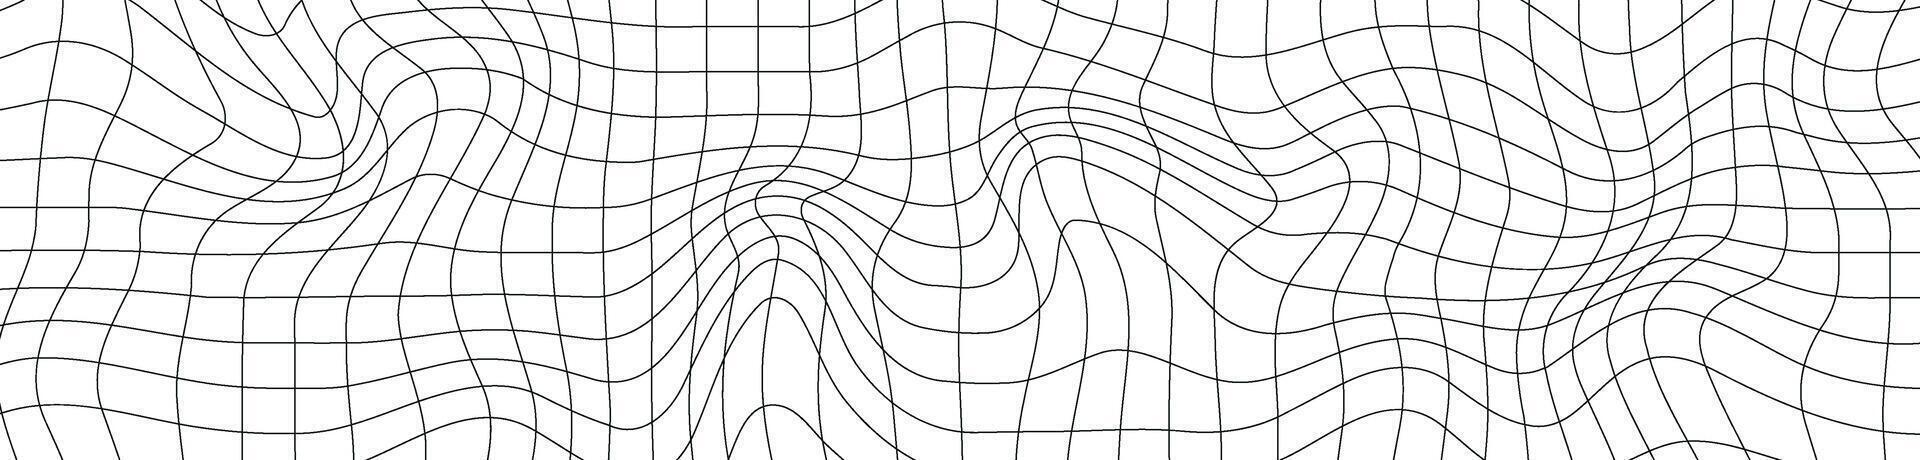 Abstract 3D wireframe mesh grid with a wave pattern. Flat illustration isolated on white background. vector